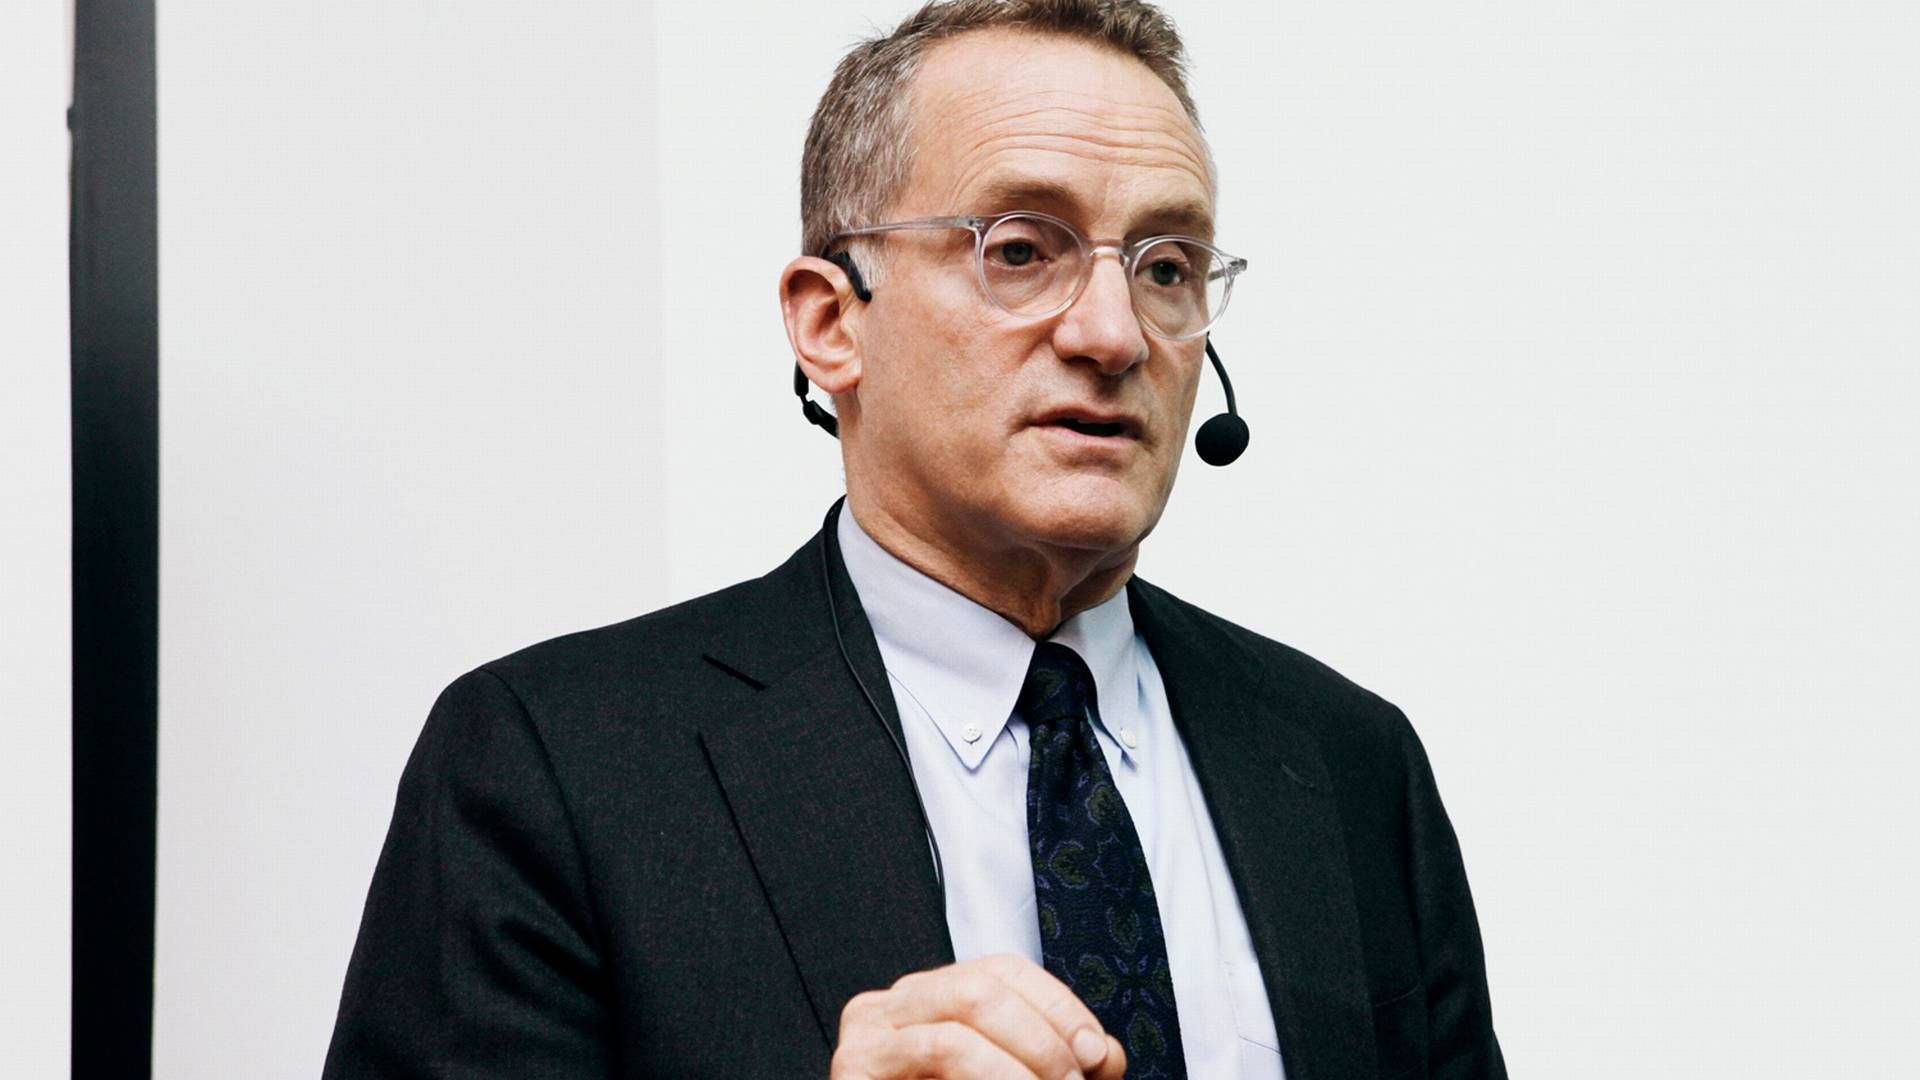 The management continues at Oaktree, despite new investor, including Howard Marks. | Photo: Pressefoto